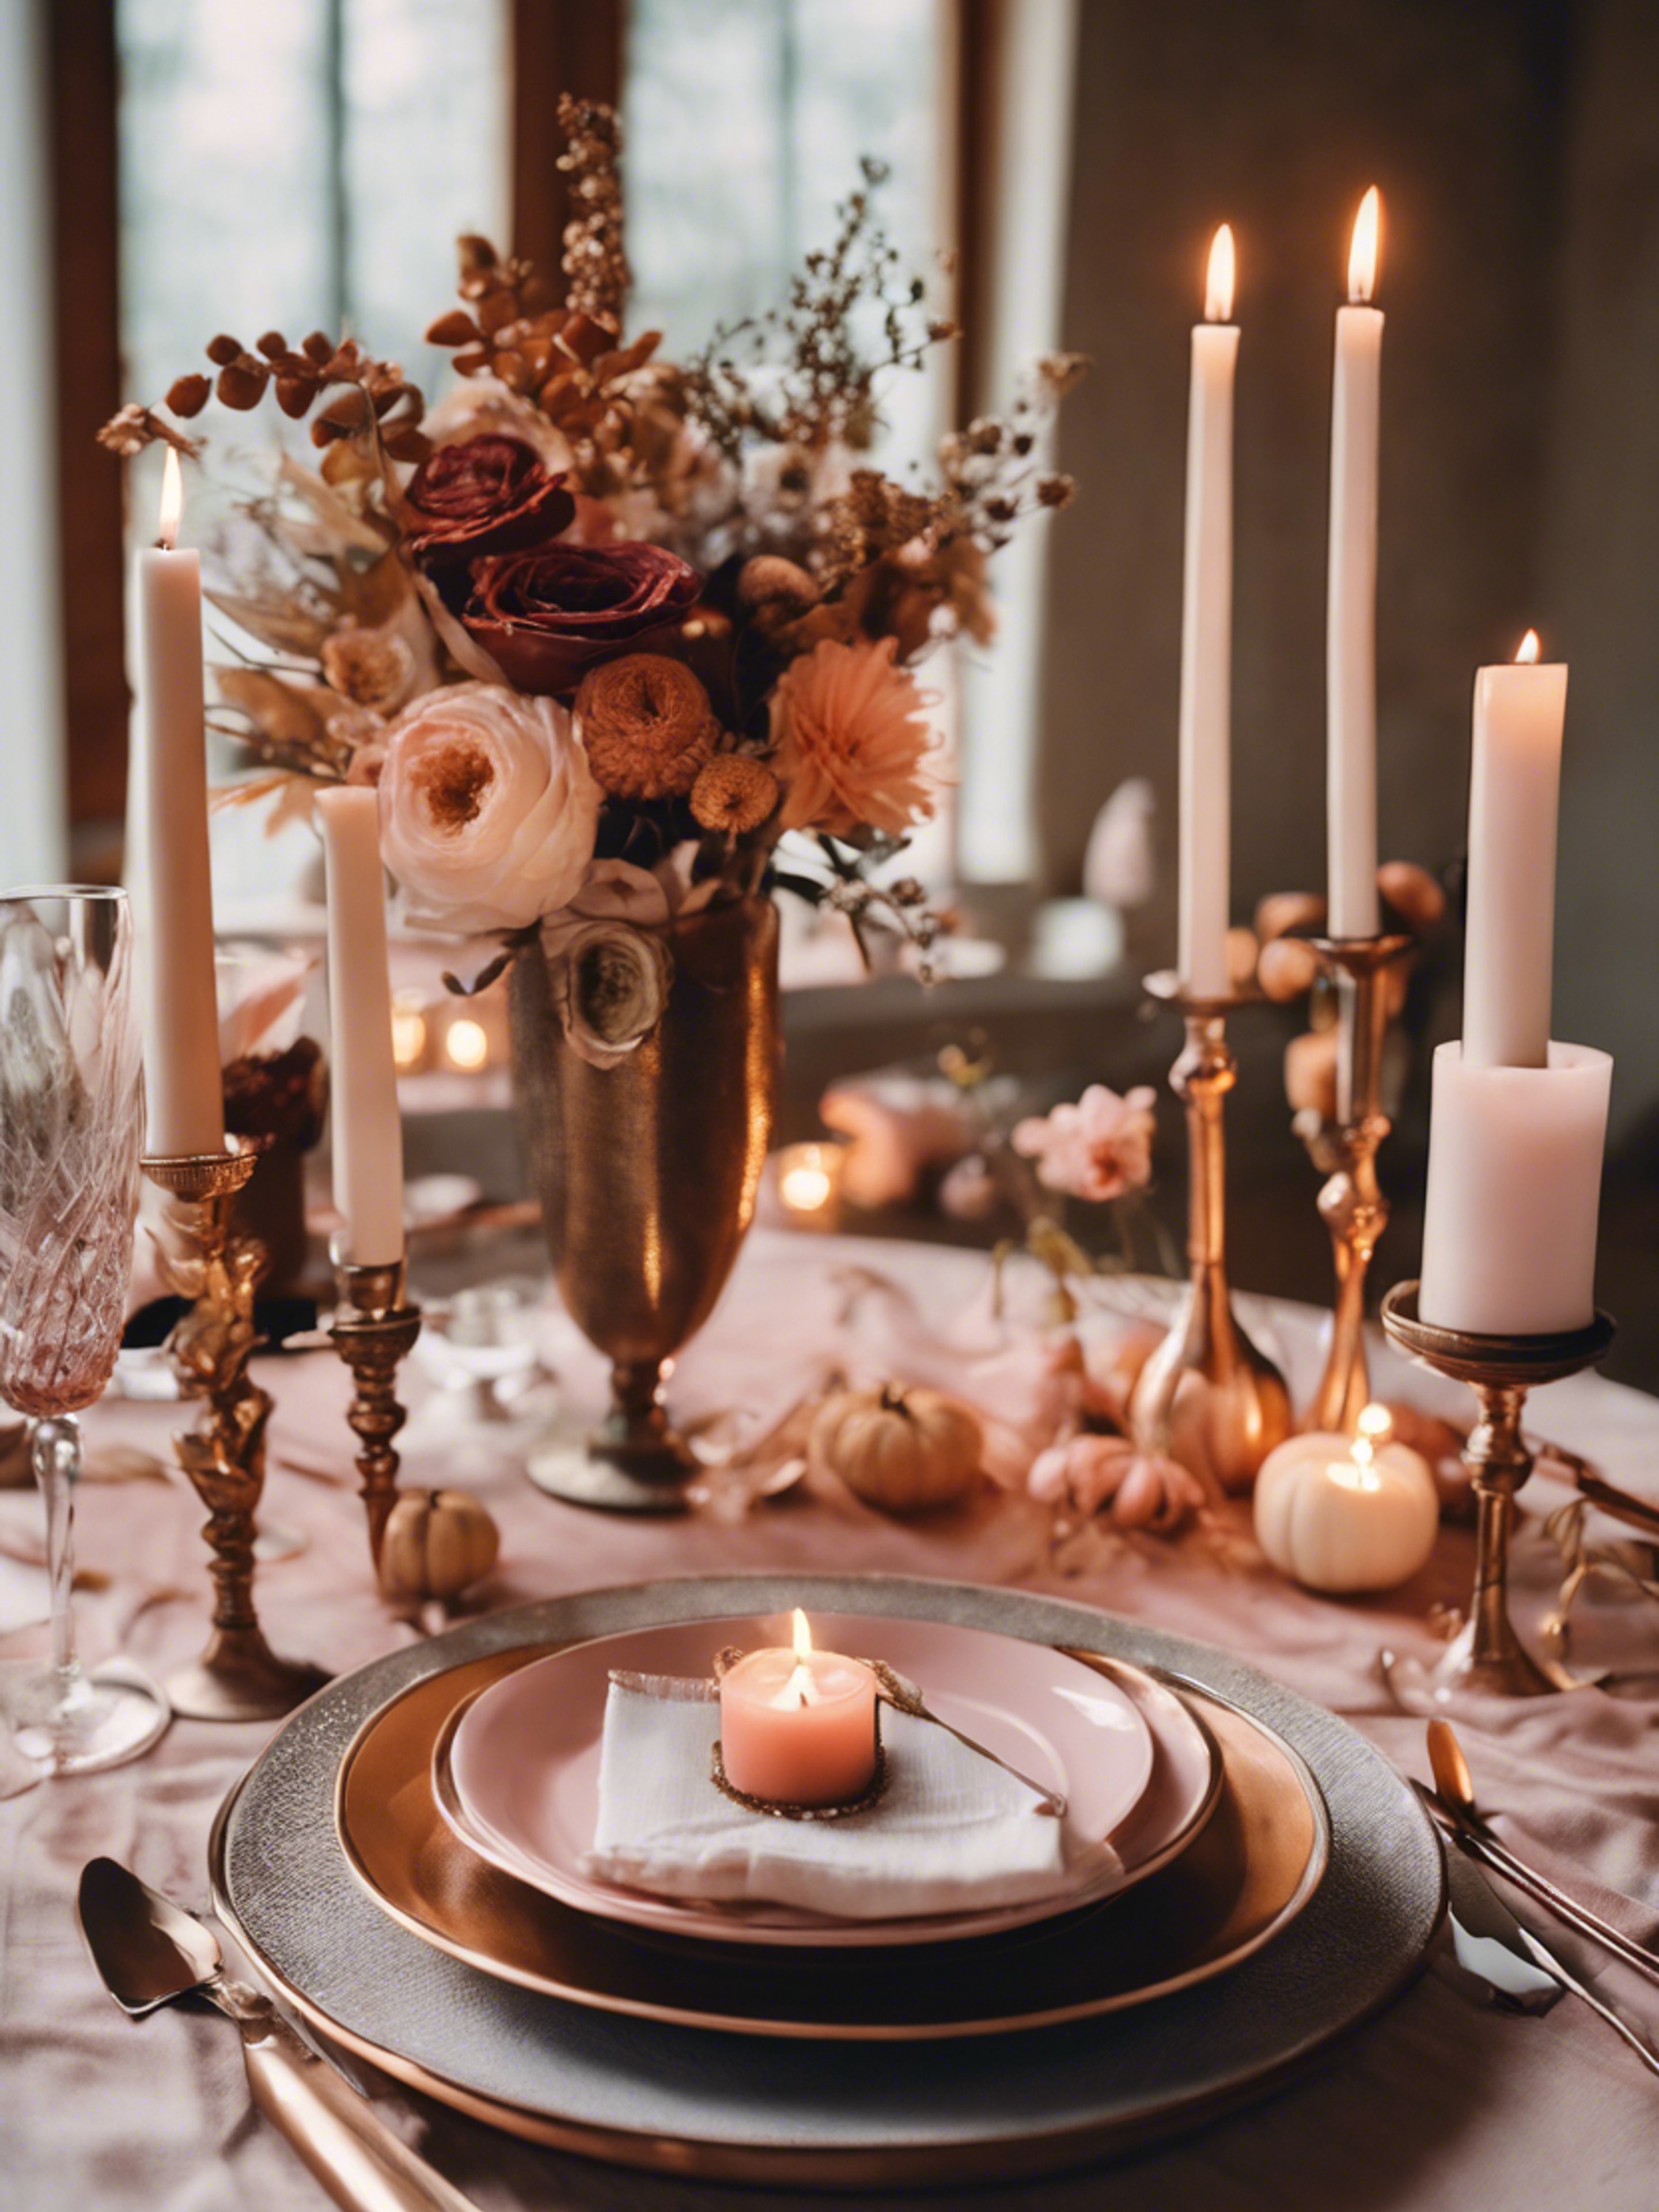 A romantic Thanksgiving tablescape for two, adorned with blush-colored candles, copper utensils, and a gorgeous floral centerpiece. Wallpaper[bc0a53f0db0f4071a53b]